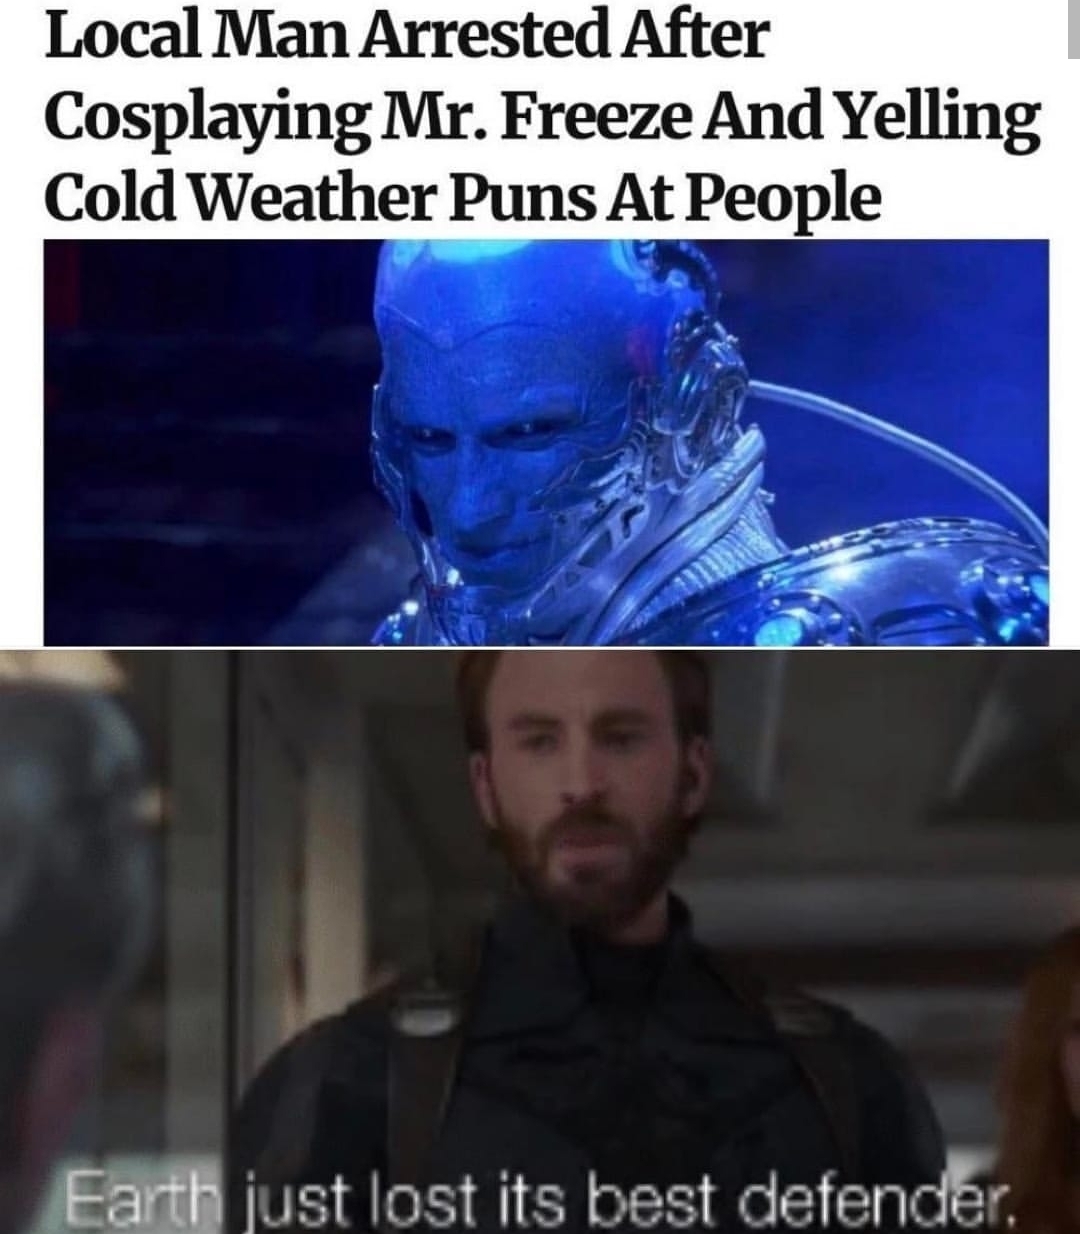 local man arrested after cosplaying mr freeze - Local Man Arrested After Cosplaying Mr. Freeze And Yelling Cold Weather Puns At People Earth just lost its best defender.